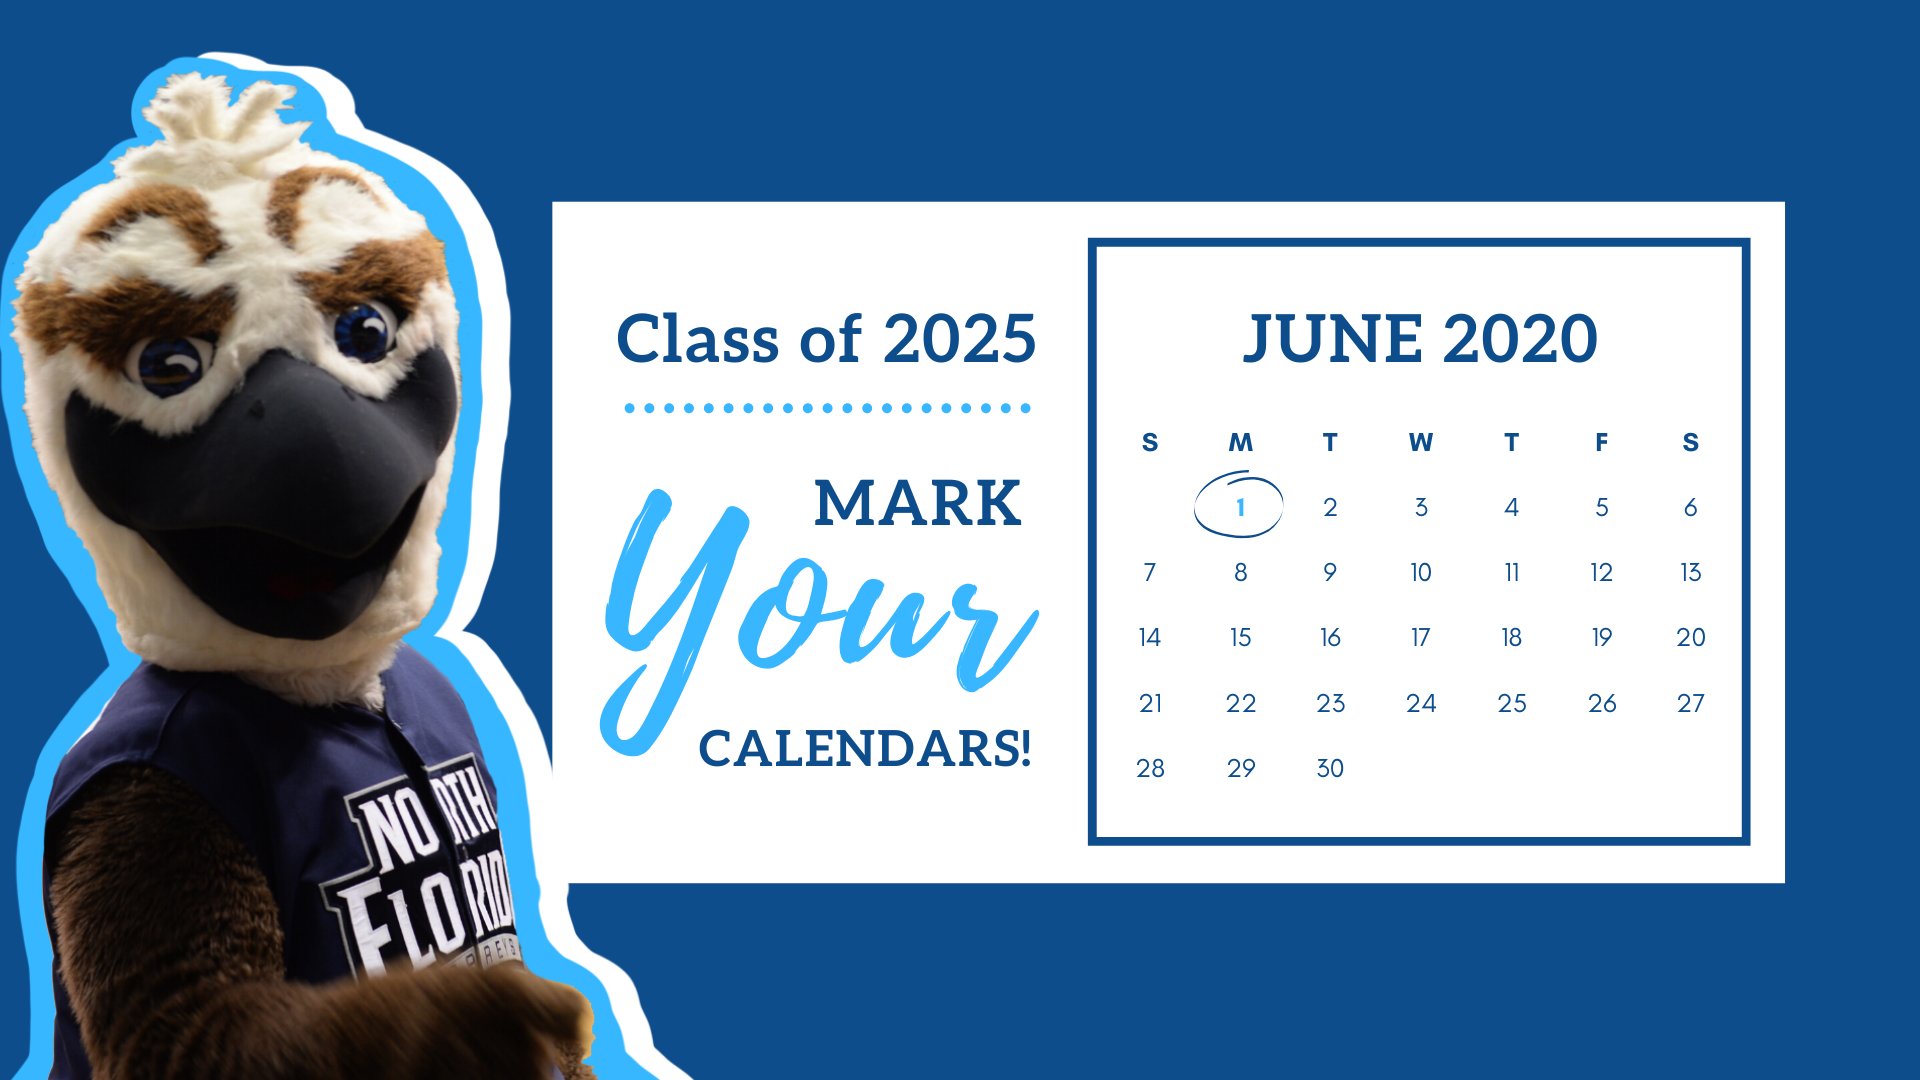 unf 2021 calendar Unf Admissions On Twitter Get Ready Unf S Summer And Fall 2021 Applications Open On June 1 Visit Https T Co 6rwxrwf3pu To Apply Yestounf unf 2021 calendar